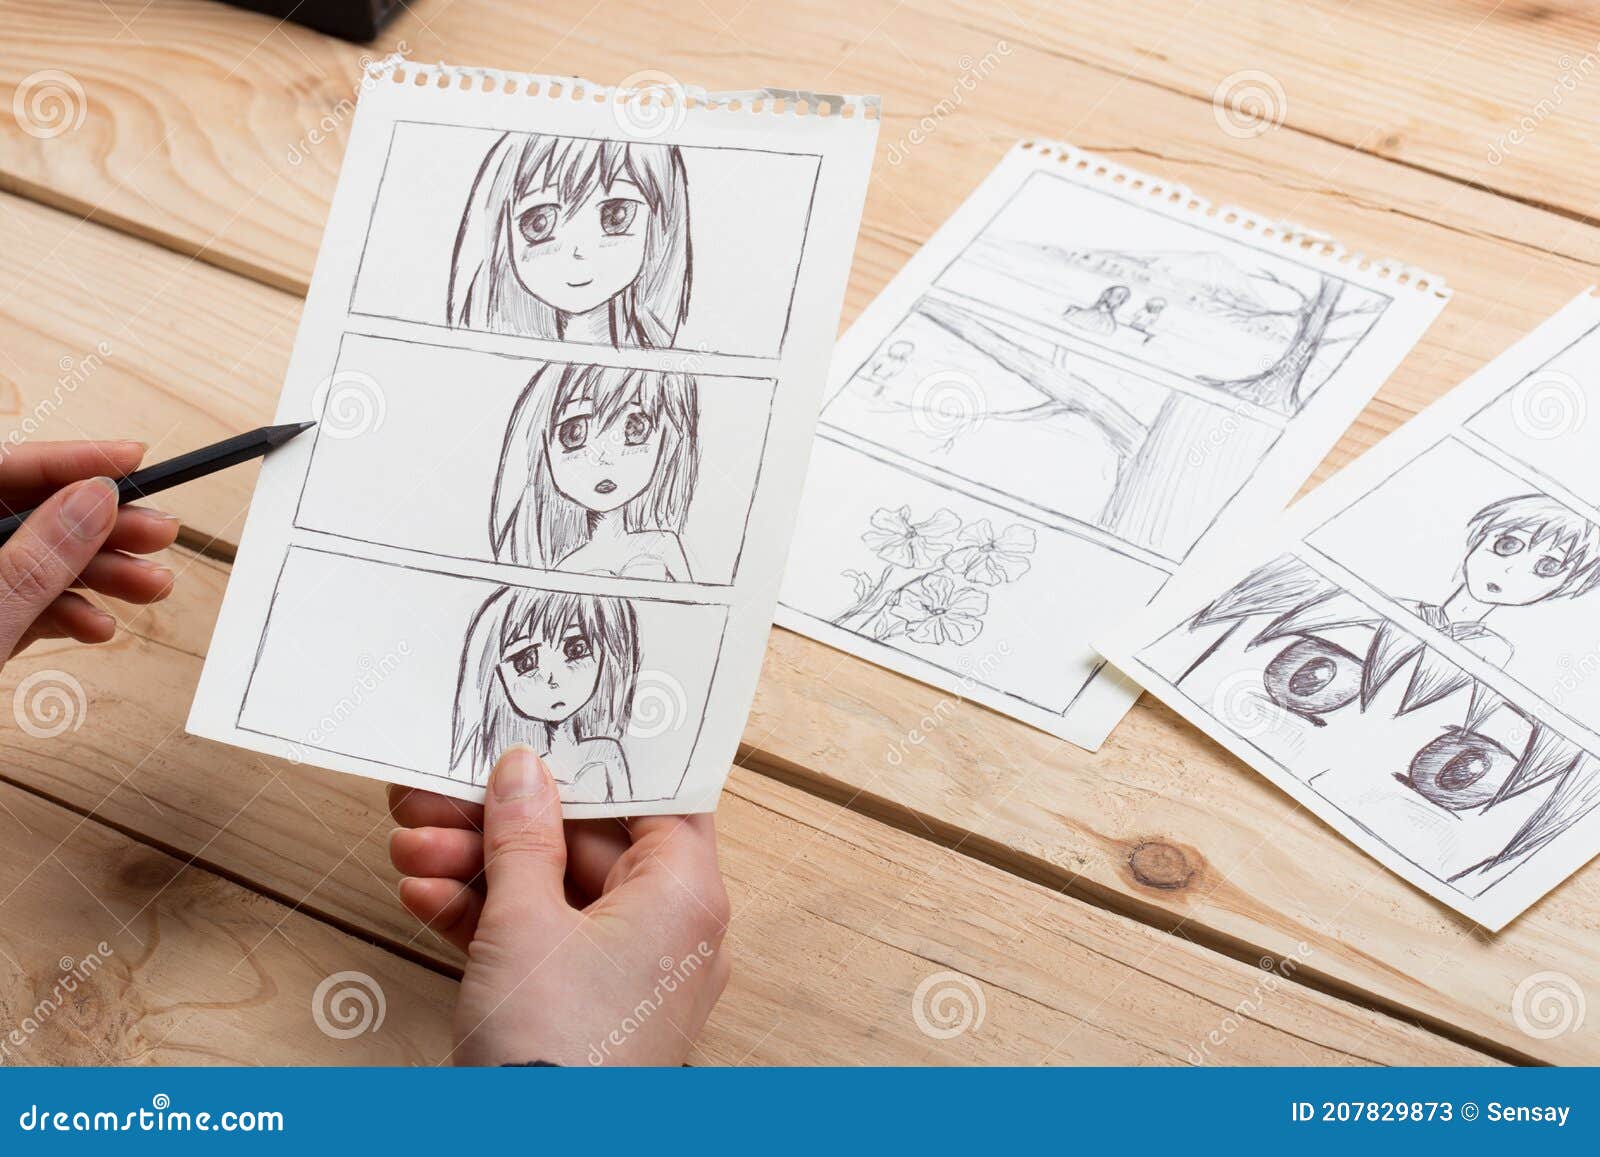 2,881 Boy anime sketch Royalty-Free Images, Stock Photos & Pictures